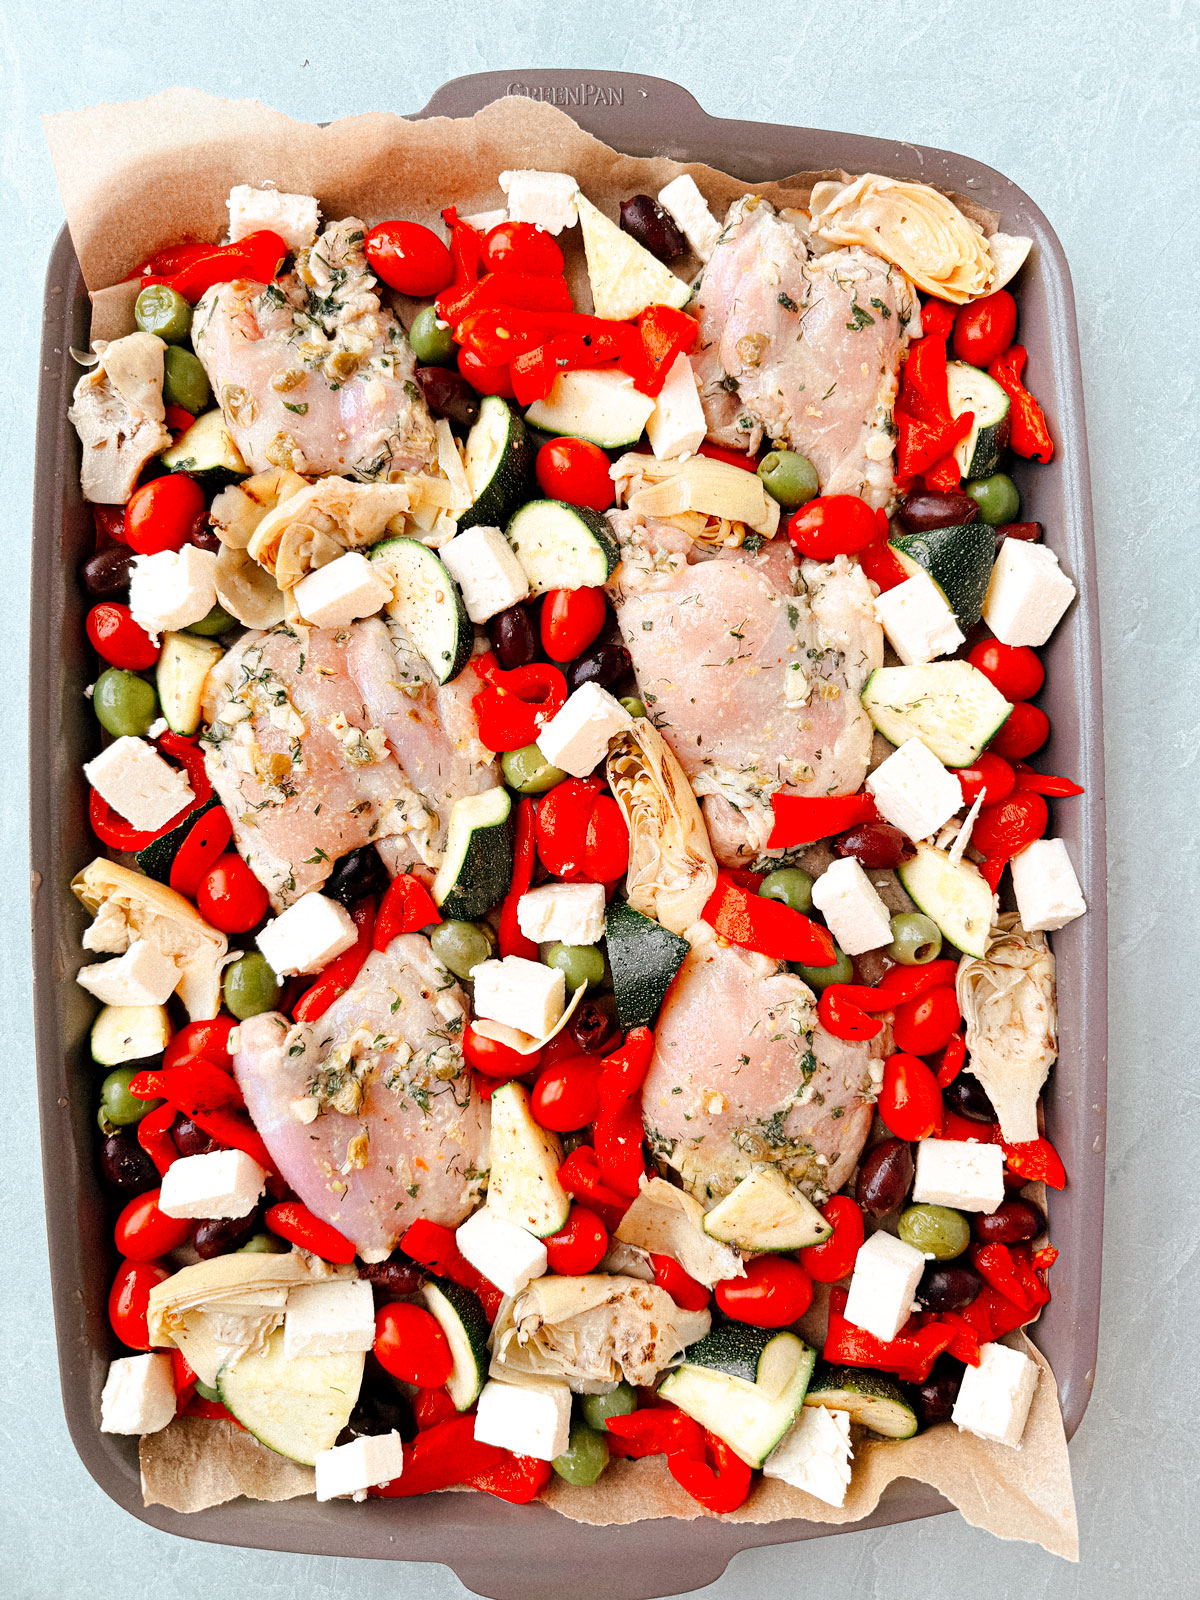 Chicken thighs and vegetables spread out on a sheet pan.